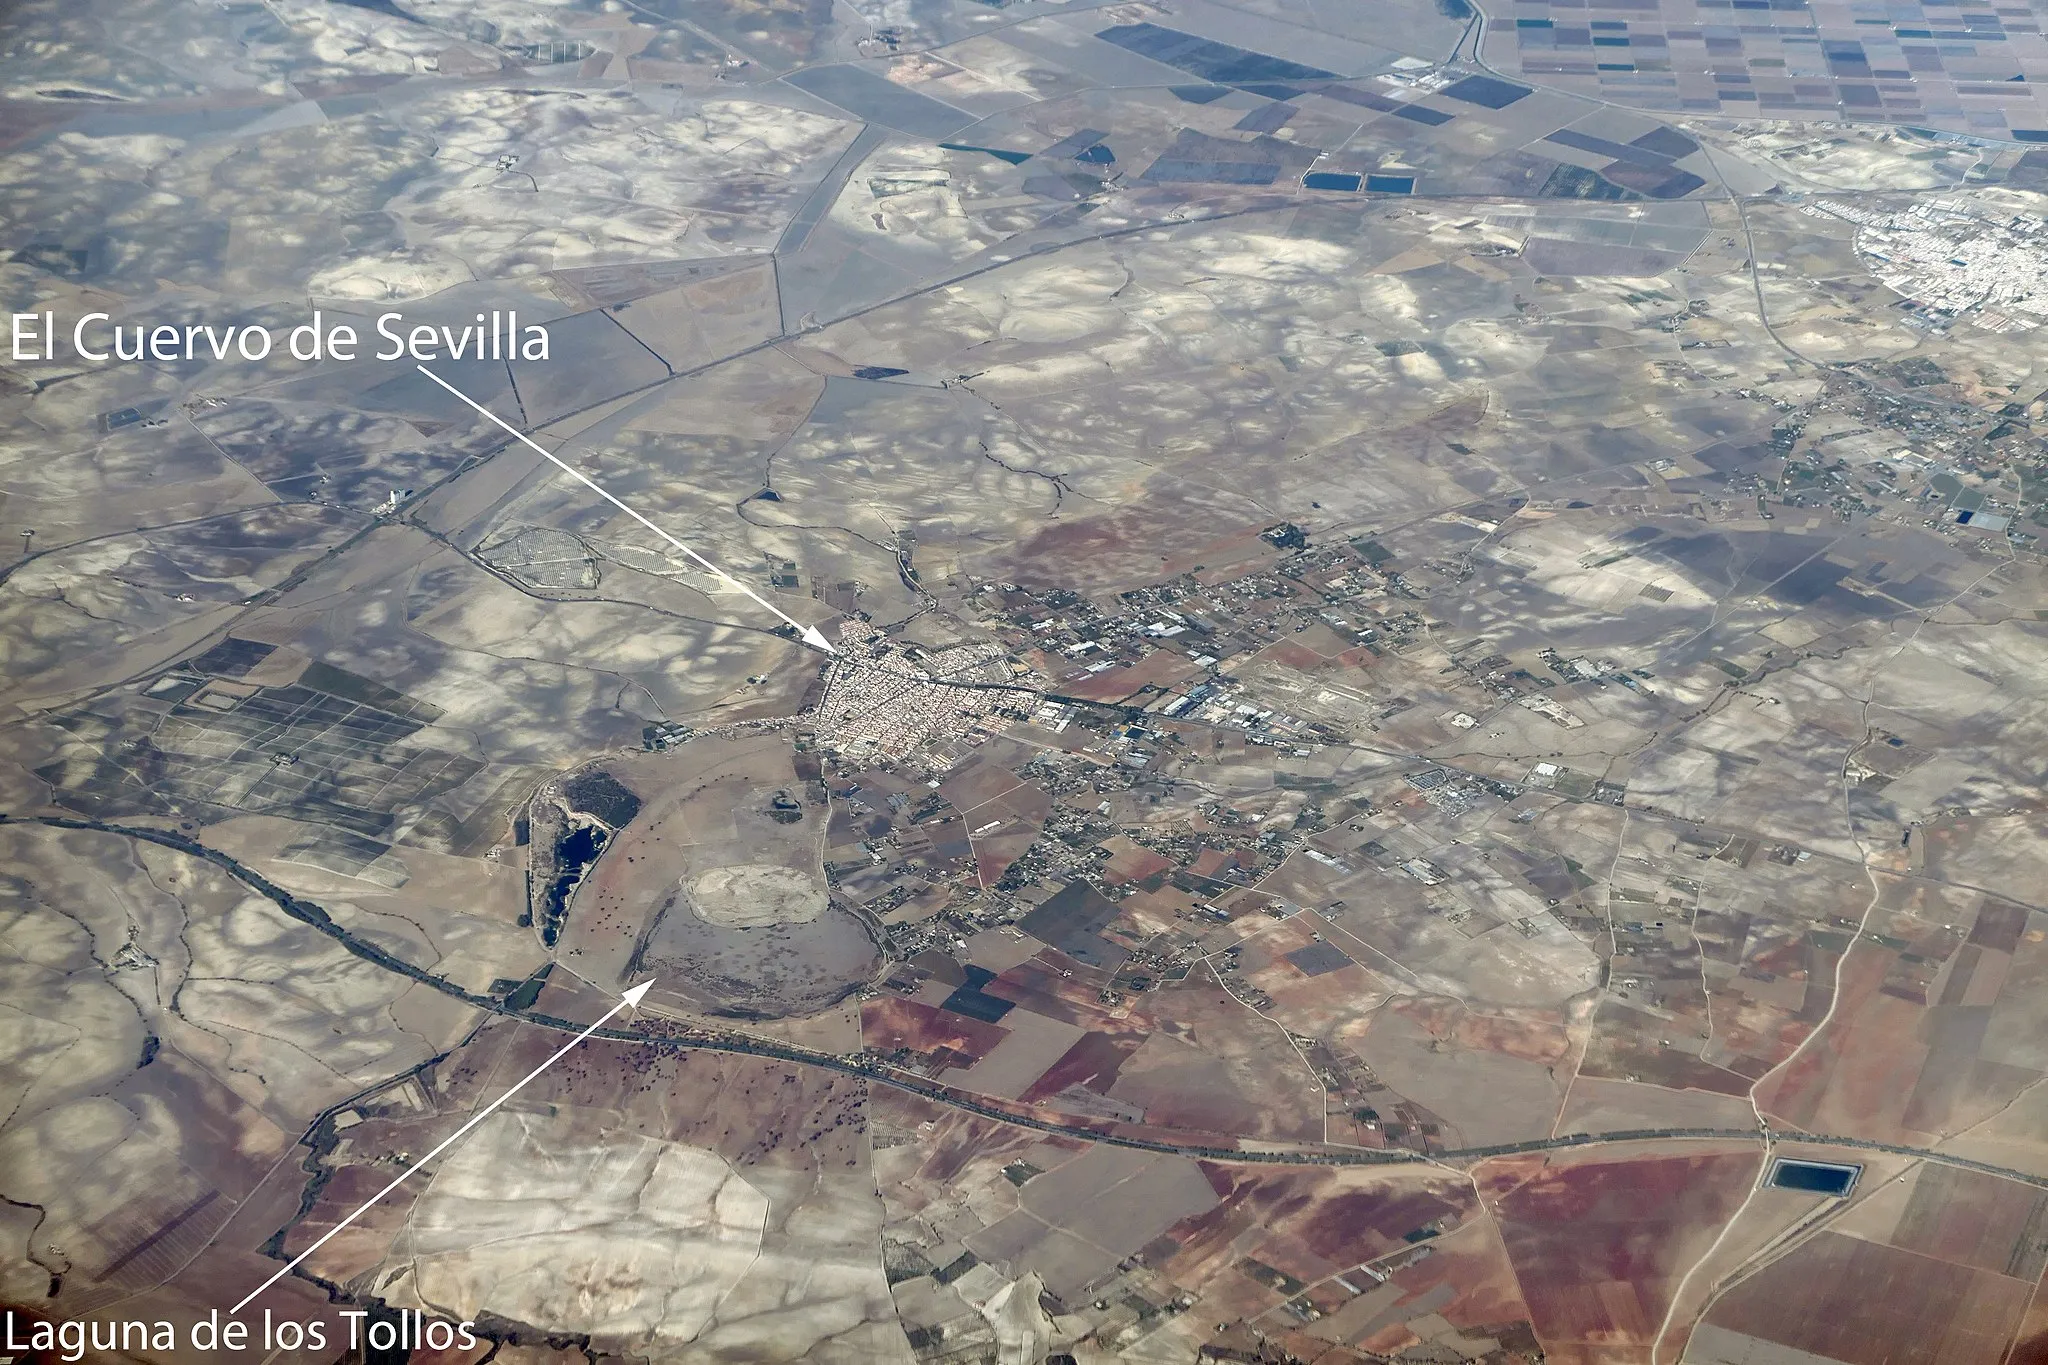 Photo showing: An aerial view of the town of El Cuervo de Sevilla.